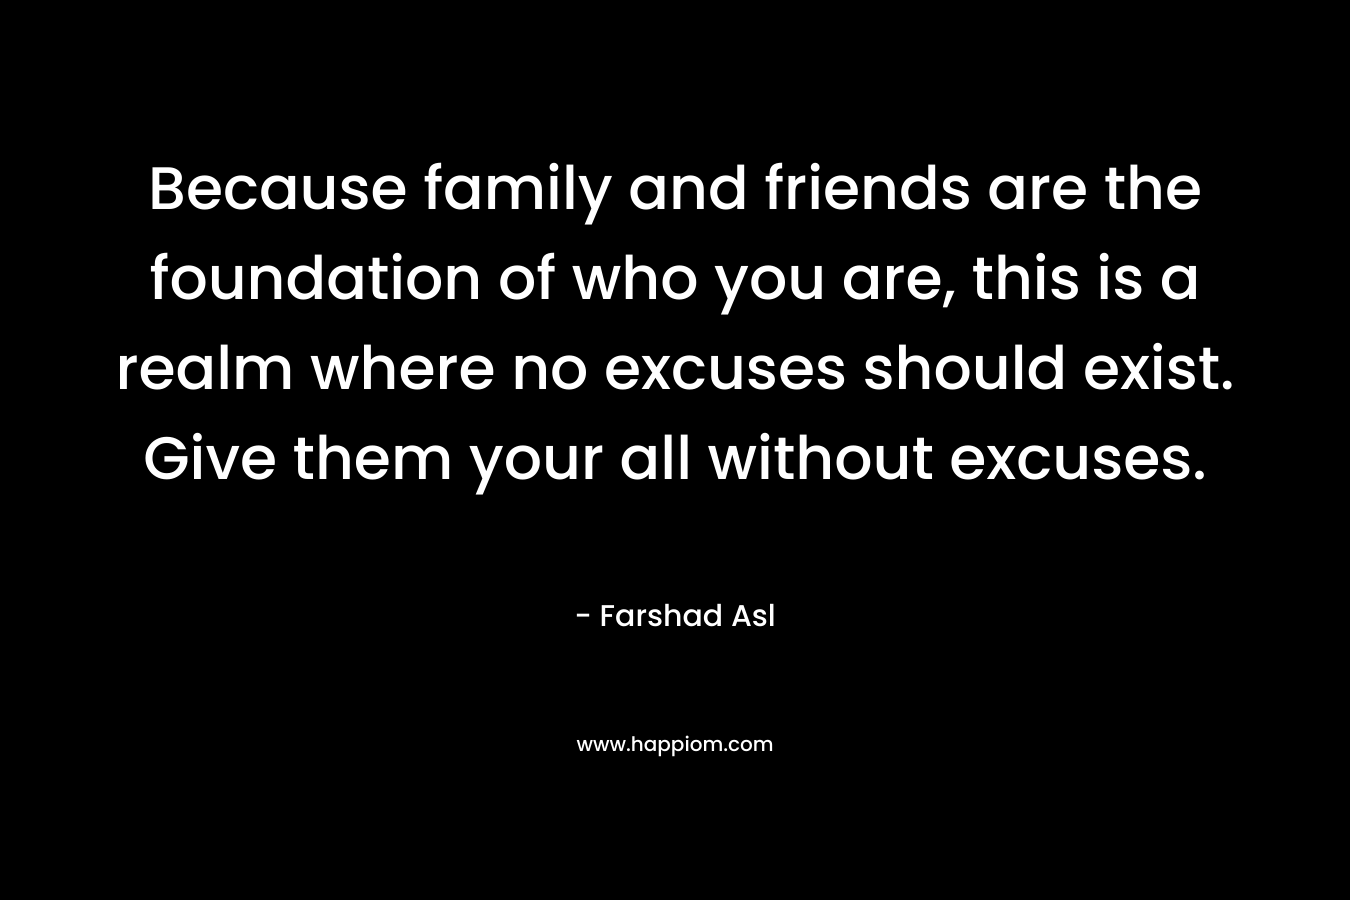 Because family and friends are the foundation of who you are, this is a realm where no excuses should exist. Give them your all without excuses.